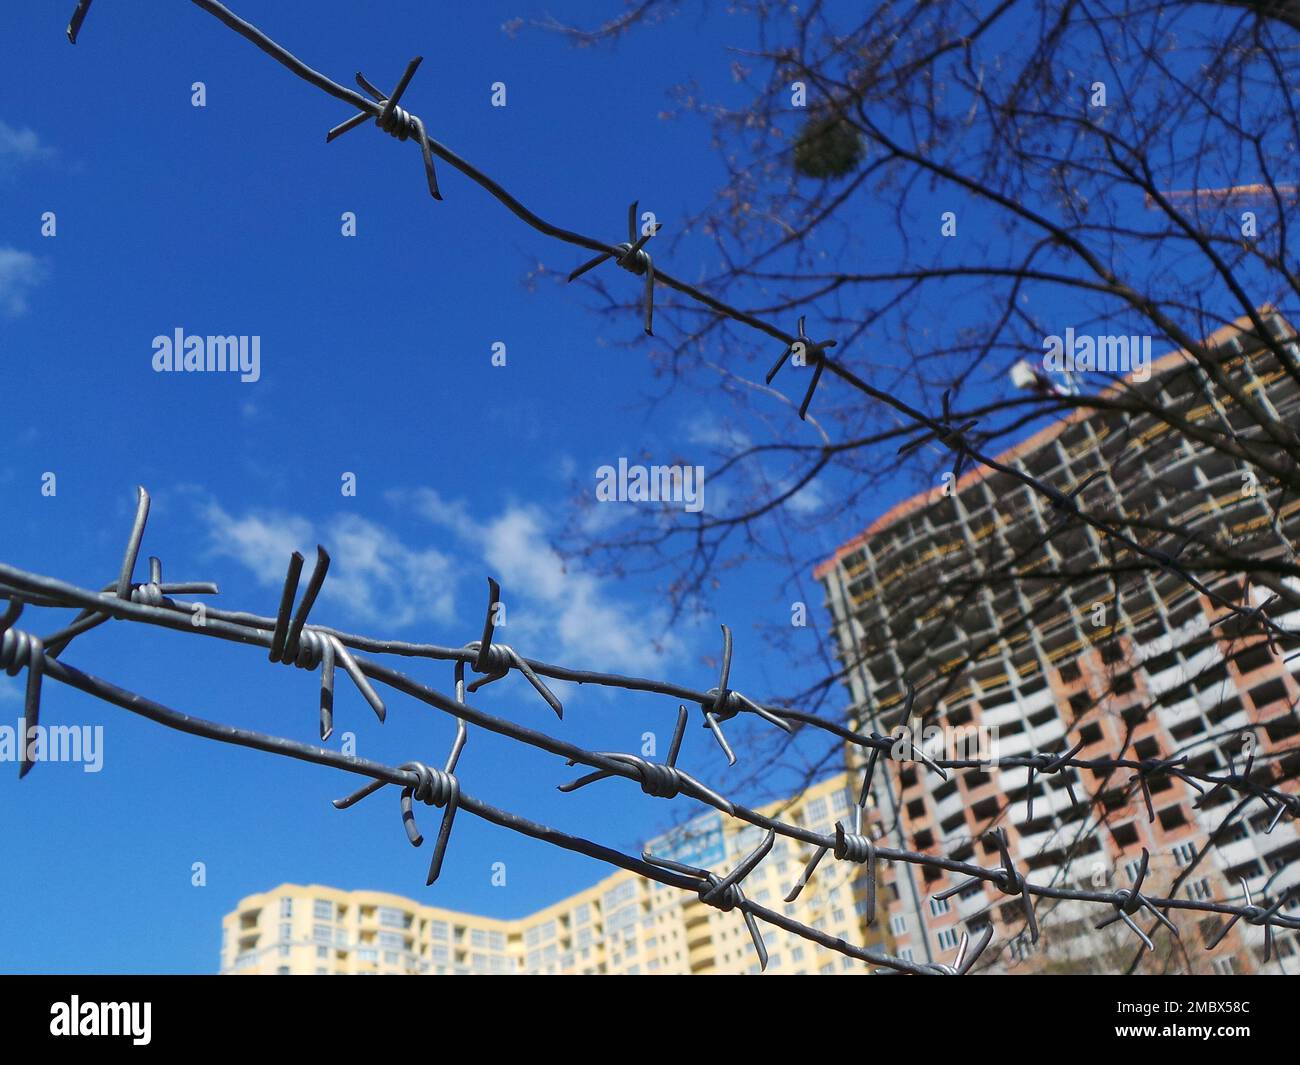 Concertina Wire Shields Construction Site With Unfinished Building Stock Photo